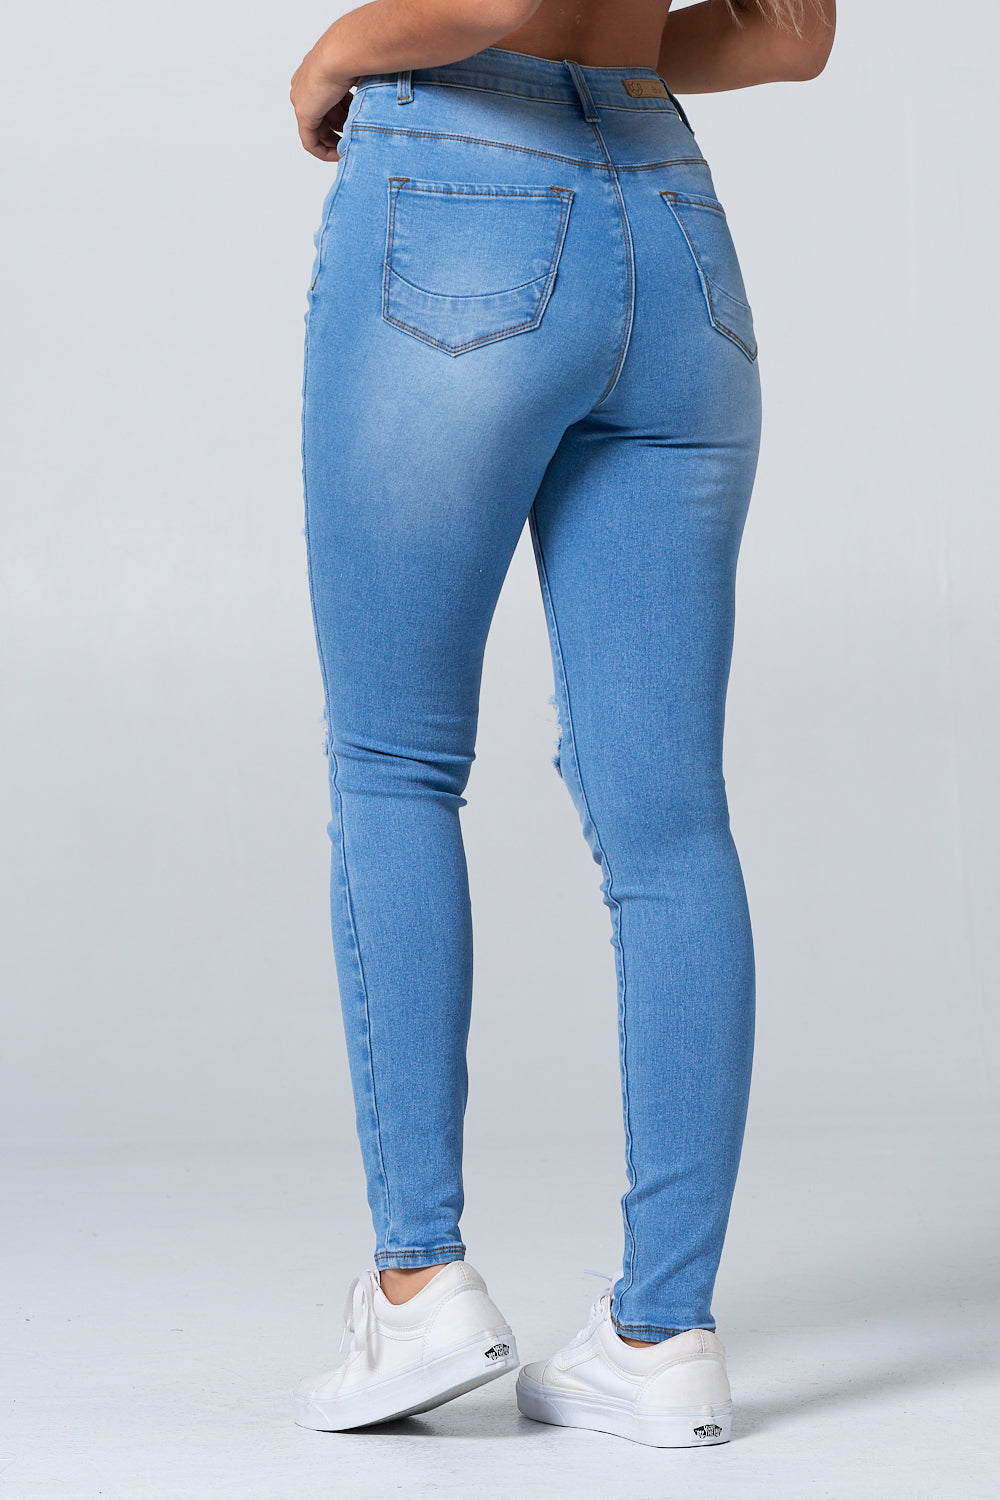 Breathable Skin Friendliness Regular Fit Light Blue Stretchable Fit Denim  Slim Ladies Jeans at Best Price in Udaipura | Maa Ganga Family Fashion